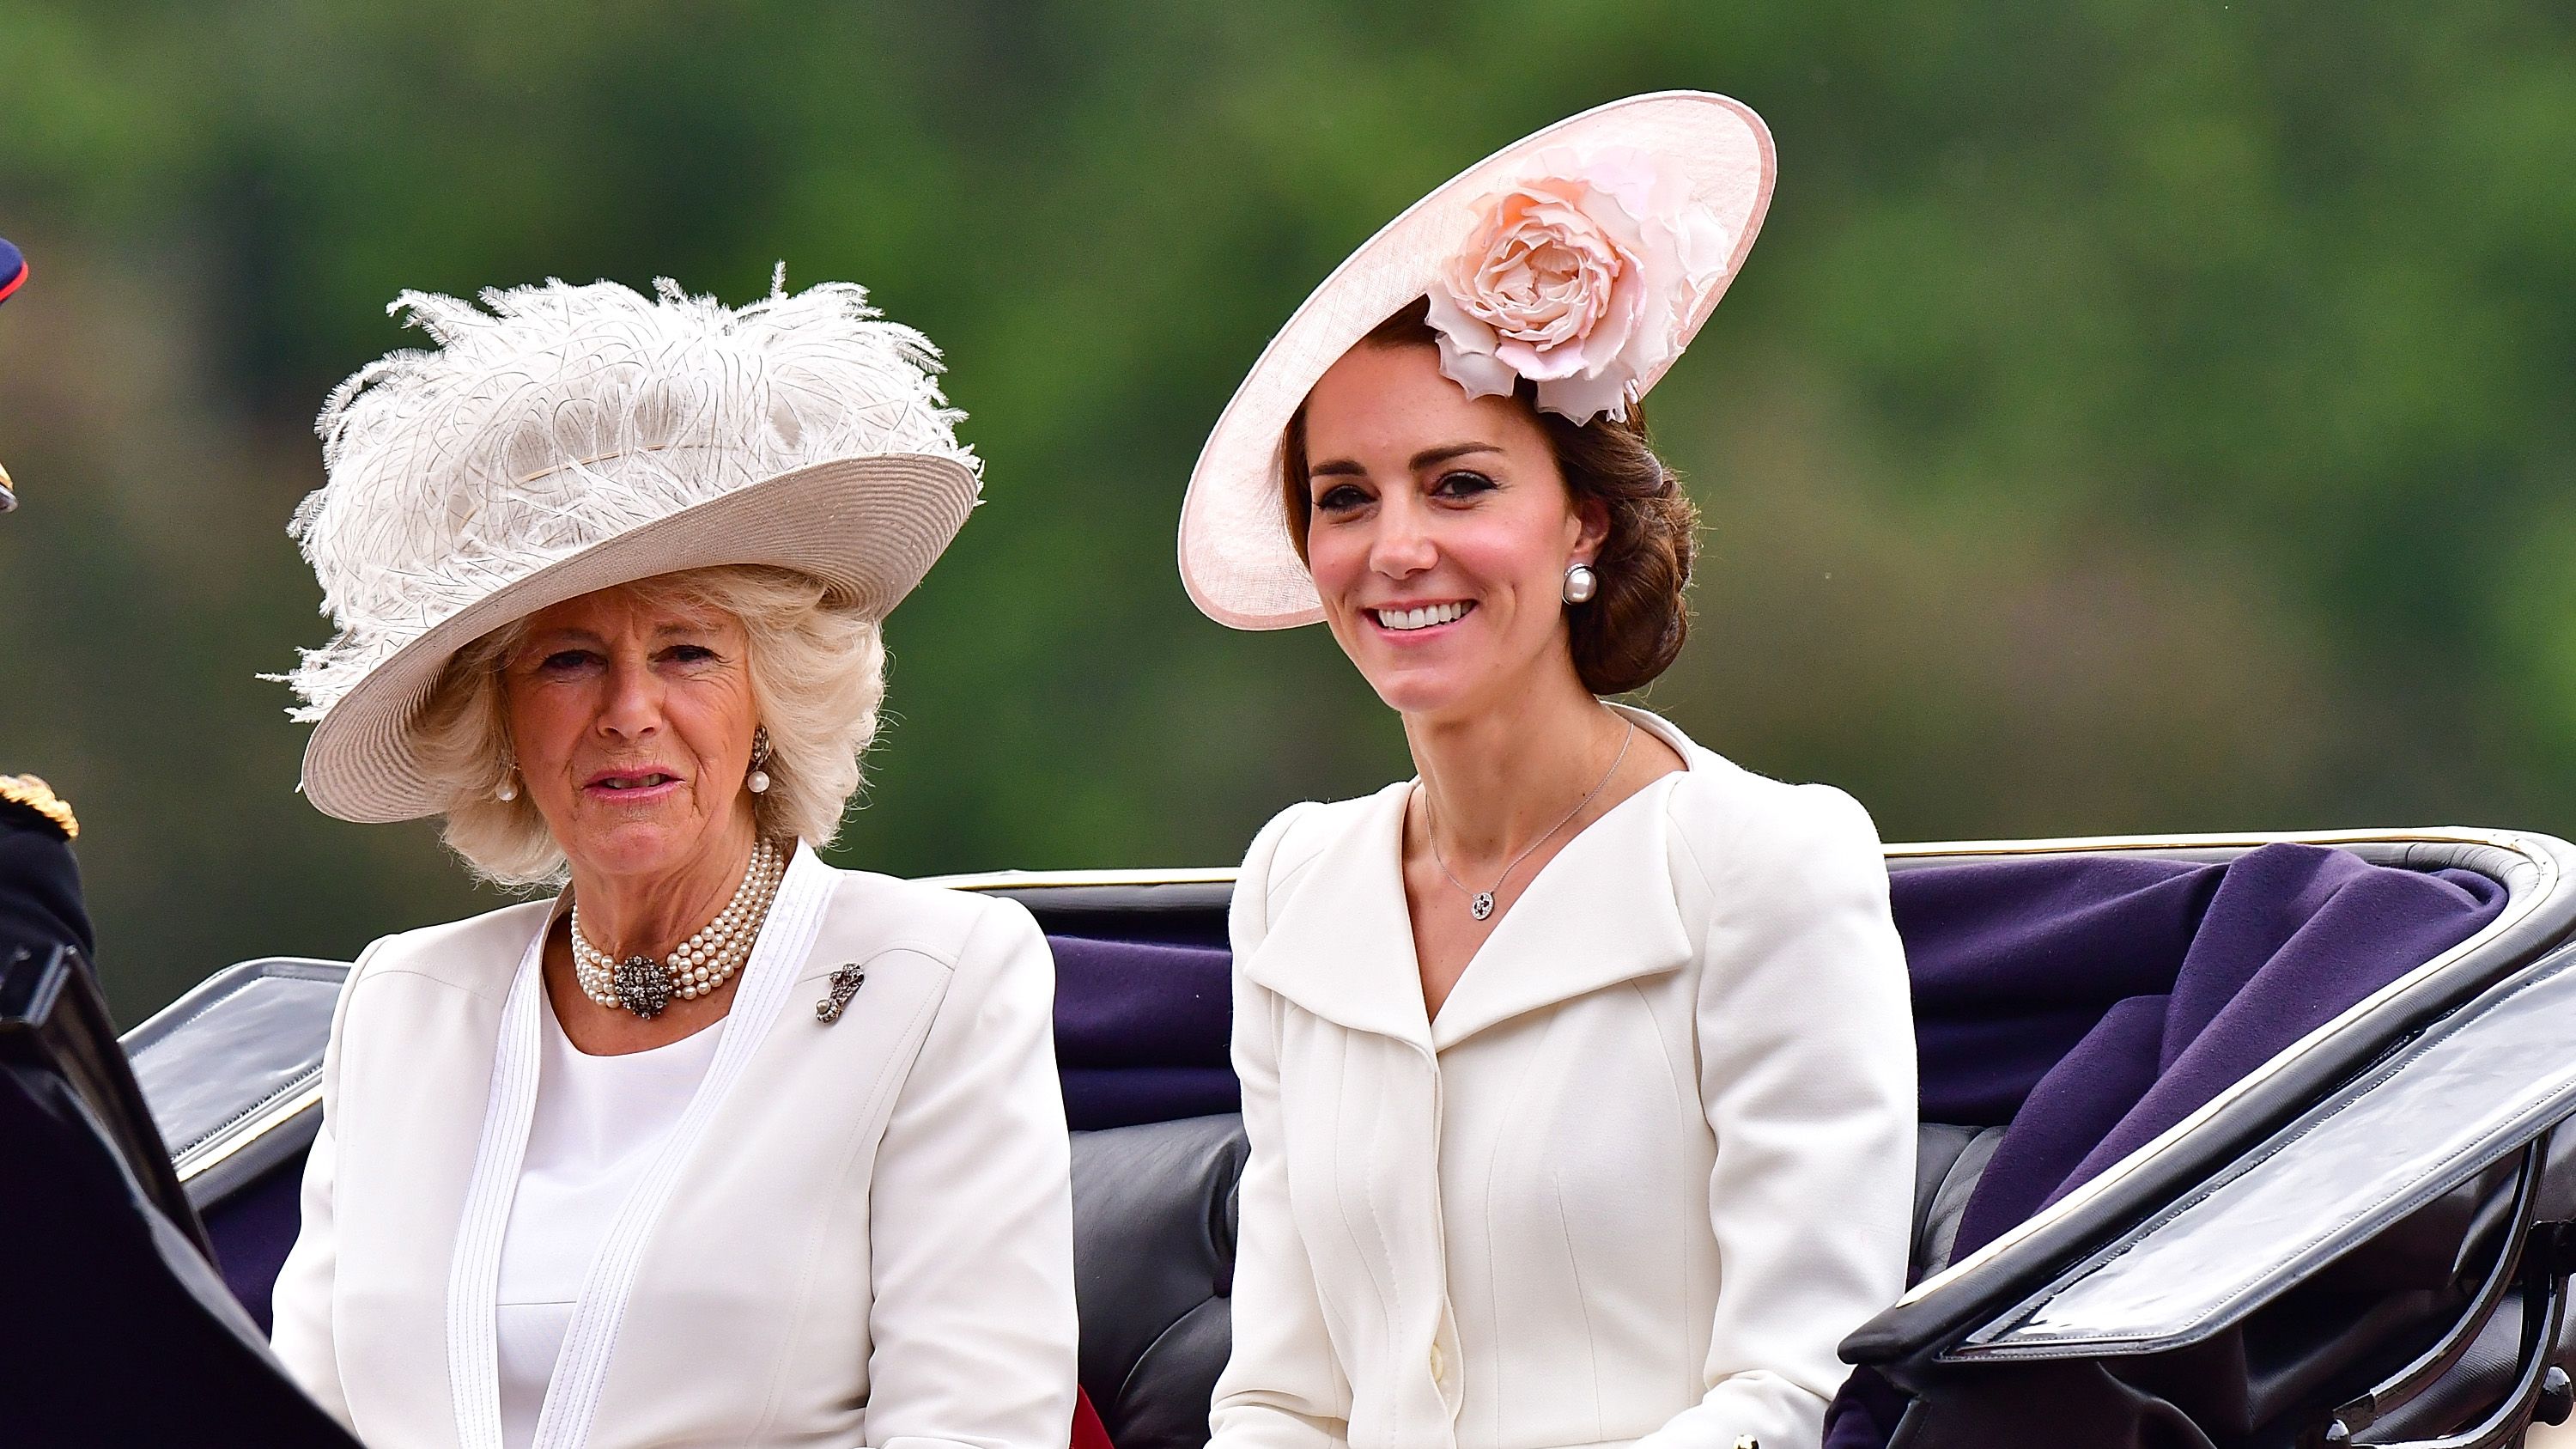 What are some of the most feminine outfits worn by Catherine, the Duchess  of Cambridge? - Quora